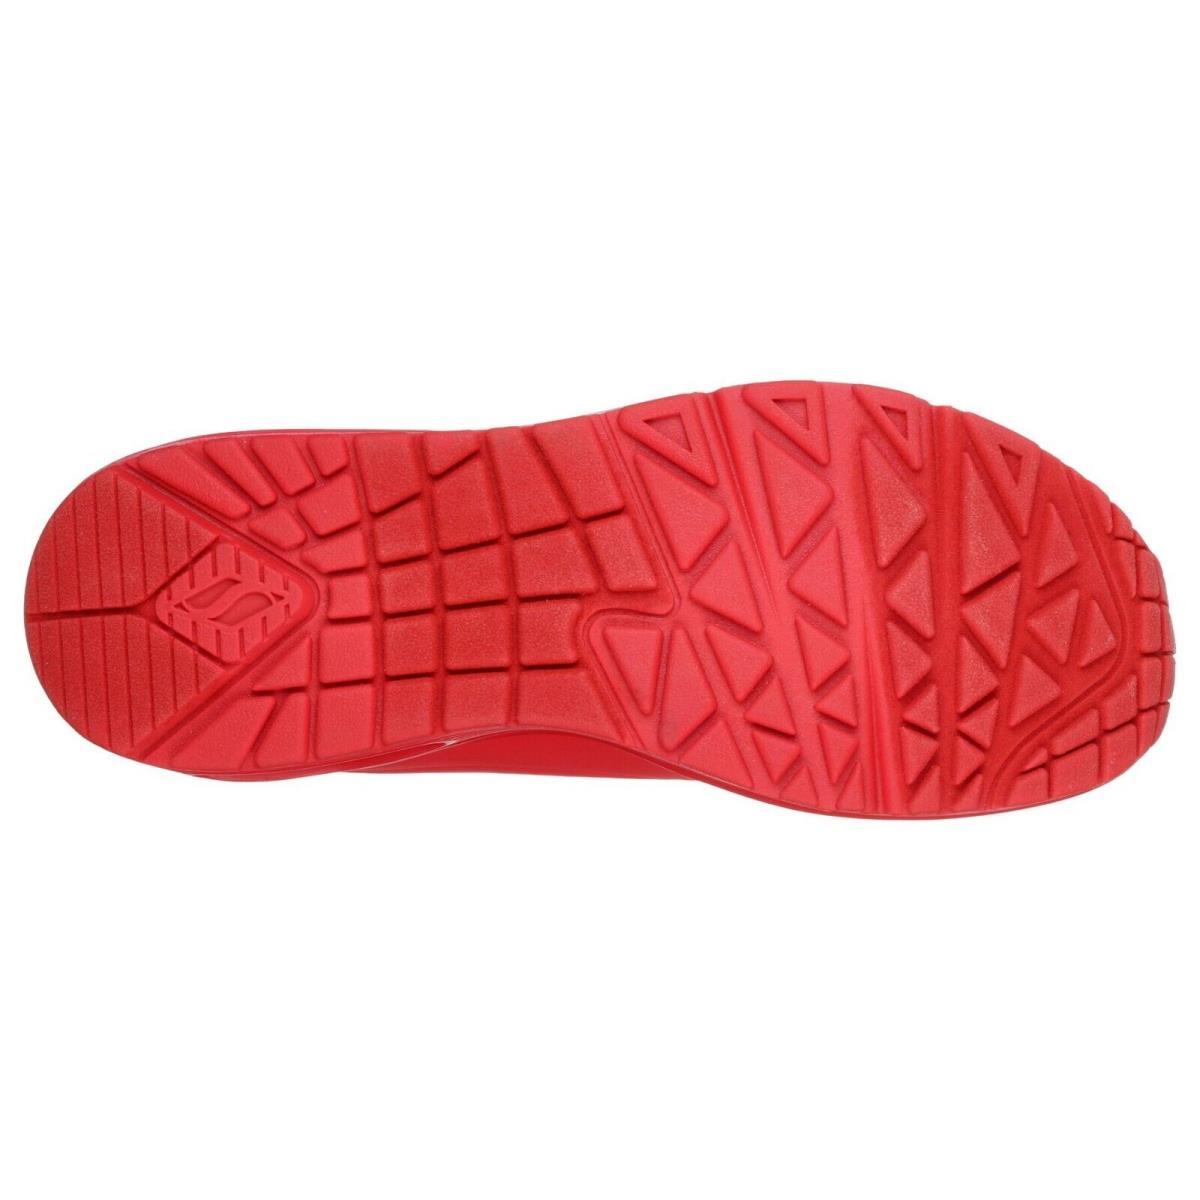 Skechers shoes  - Red 14